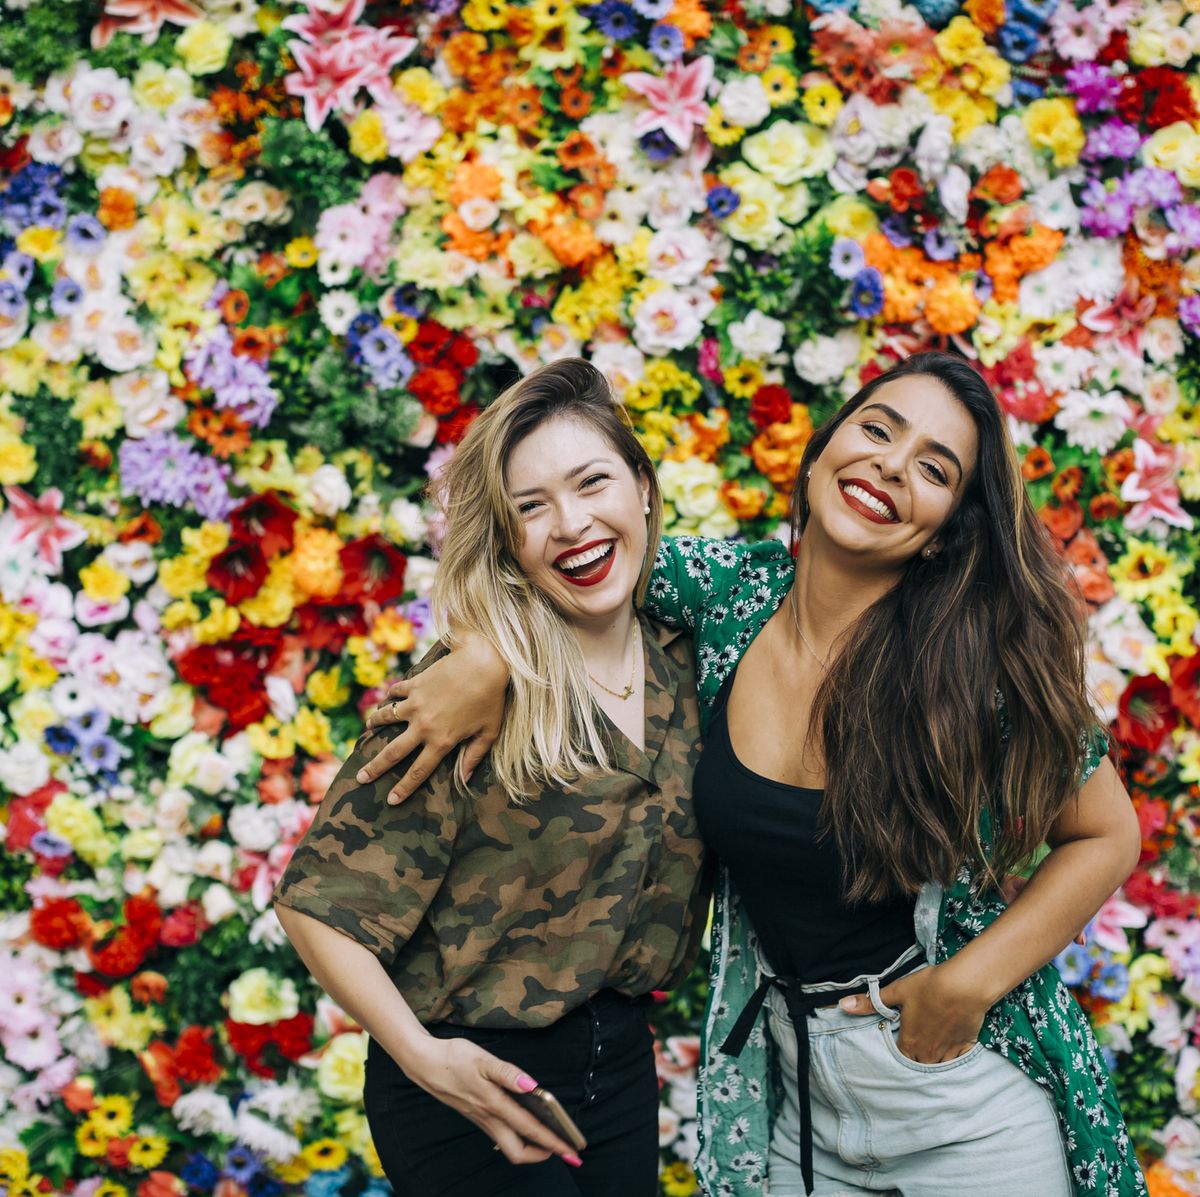 68 Meaningful Best Friend Quotes to Share with Your BFF